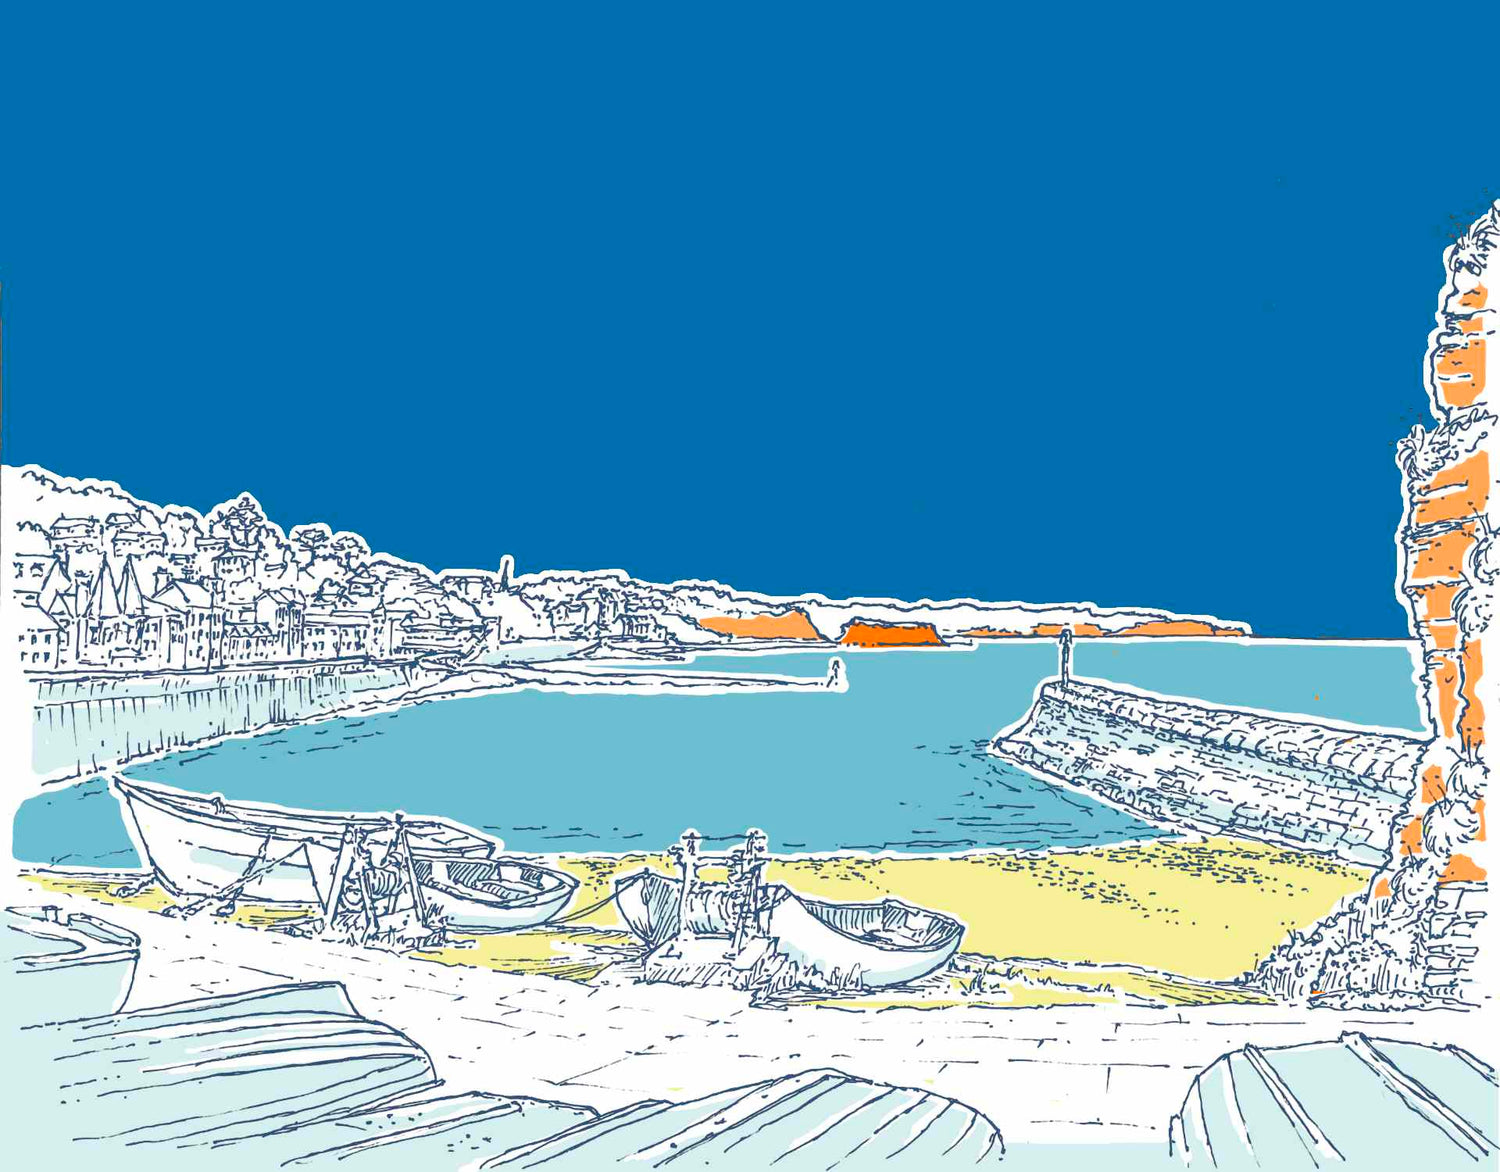 Nelly P's illustration of Boat Cove, Dawlish, Devon, UK - a line drawing illustration in blue lines, showing small blue boats in the foreground, fishing boats on a slipway, the Boat Cove breakwater on the right and Dawlish town and sea wall on the left, yellow sand , blue sea, and deep blue sky